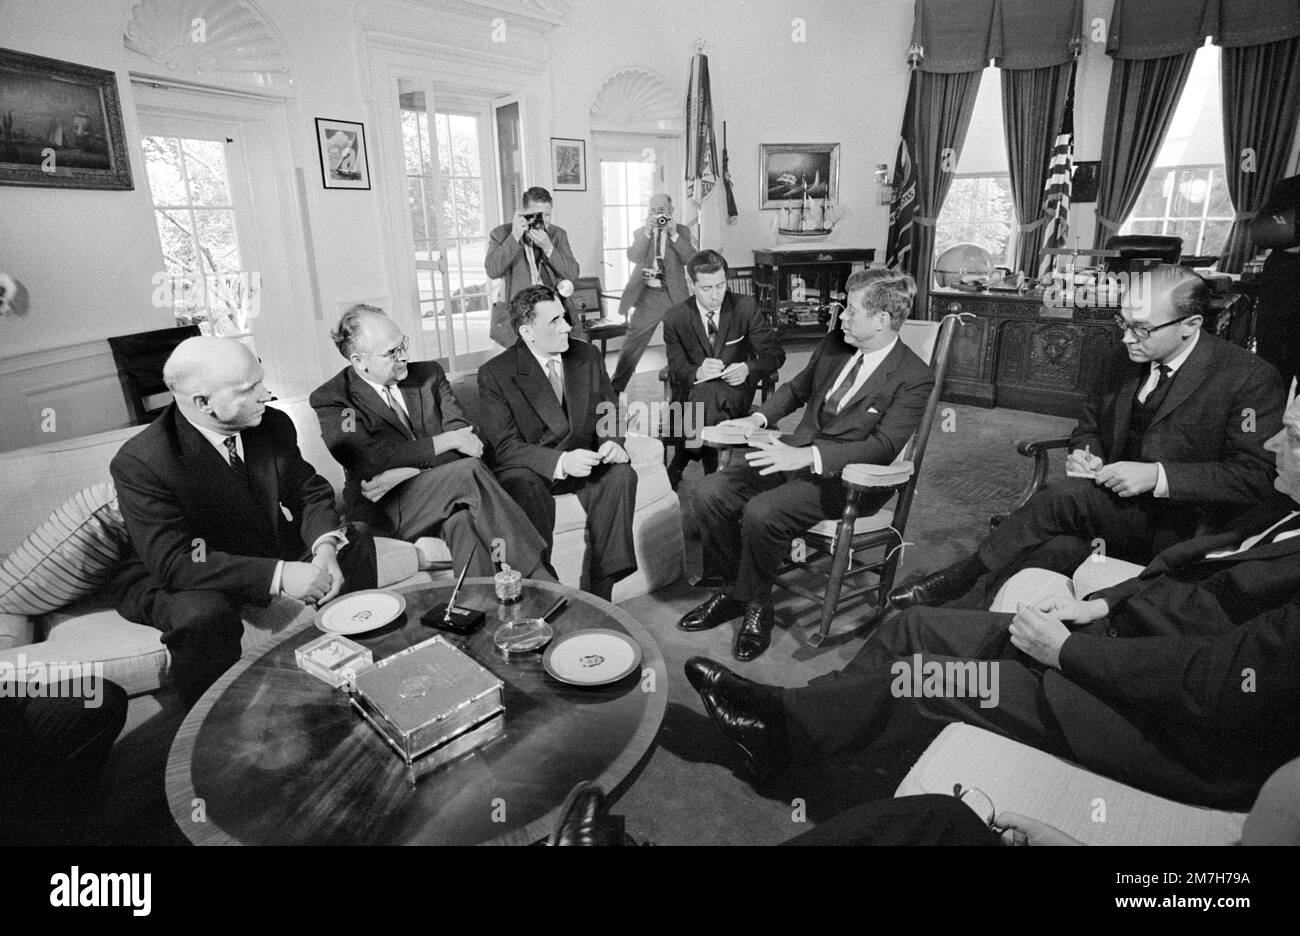 Andrei Gromyko, Soviet Minister of Foreign Affairs, and others, with U.S. President John F. Kennedy in the Oval Office, White House, Washington, D.C., USA, Warren K. Leffler, US News & World Report Magazine Collection, October 10, 1963 Stock Photo